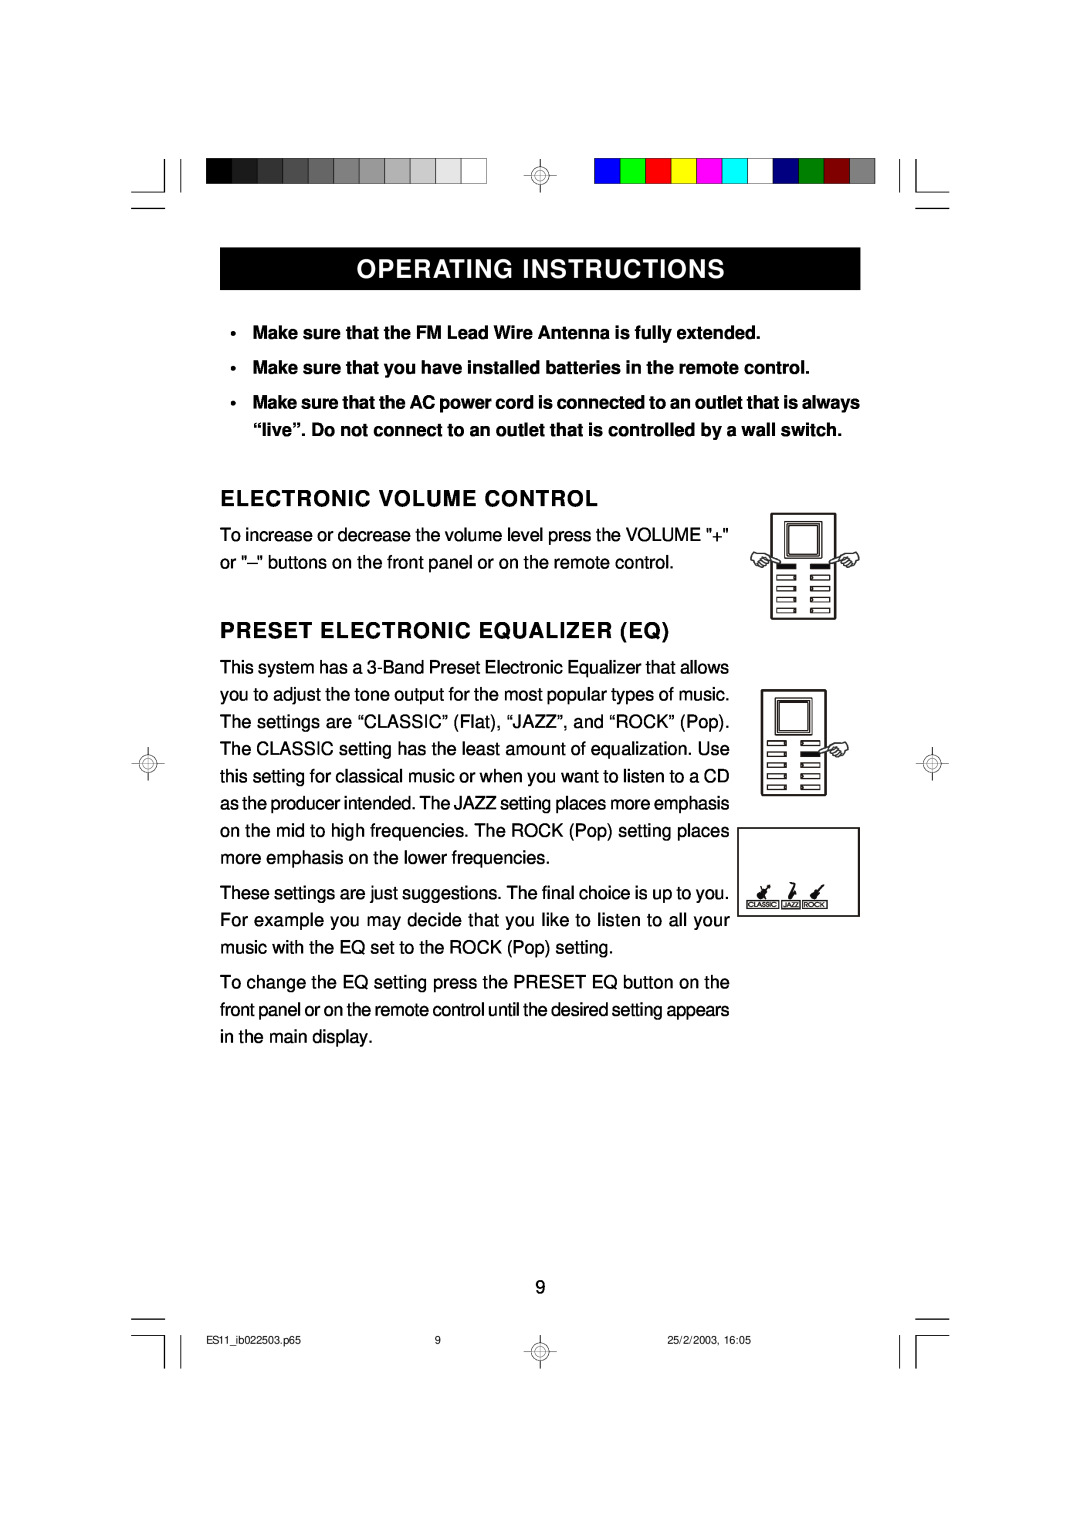 Emerson ES11 owner manual Operating Instructions, Electronic Volume Control, Preset Electronic Equalizer Eq 